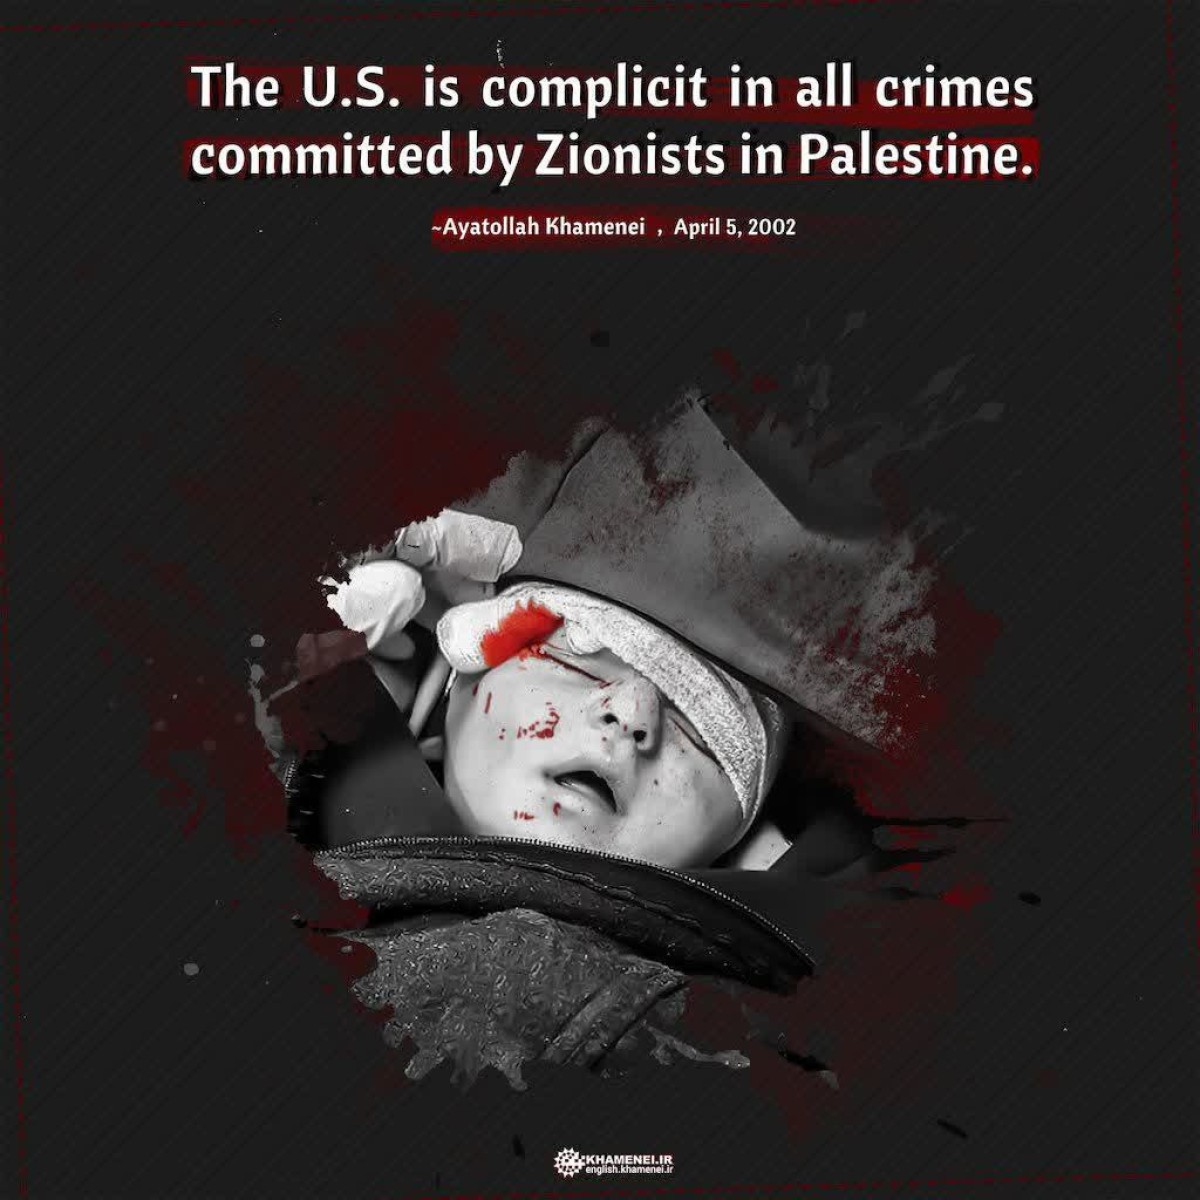 The U.S. is complicit in all crimes committed by Zionists in Palestine 1